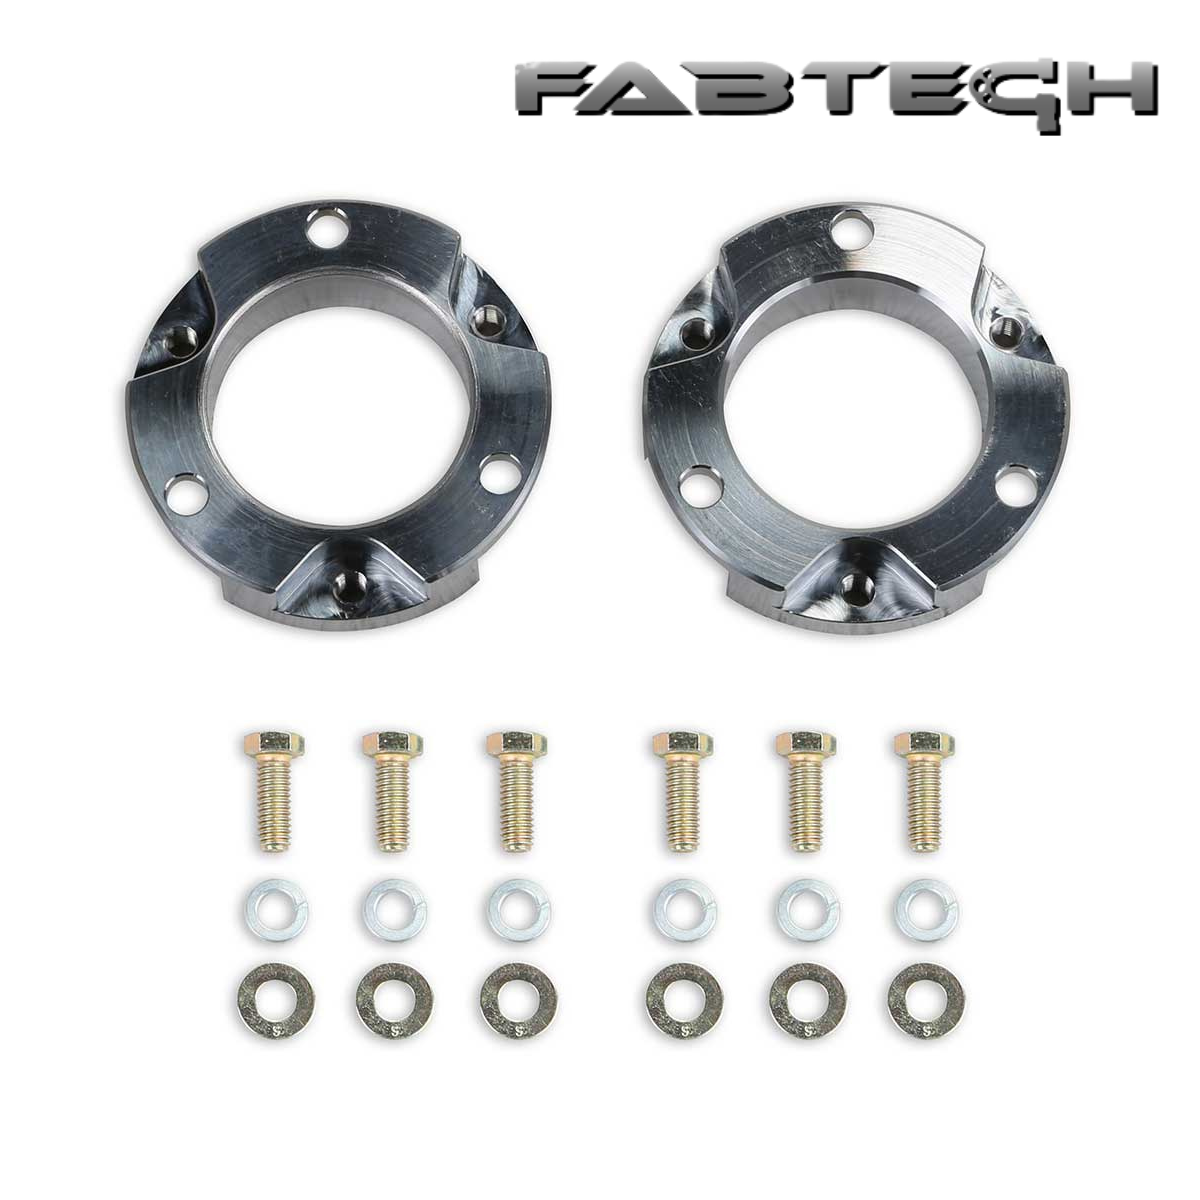 Lift your Ford Bronco and clear larger tires with Fabtech’s 1.5" 4WD Leveling Kit. This 1.5" Leveling Kit from Fabtech features CNC machined aluminum front billet spacers that work in conjunction with the factory Coilover shock assemblies and are designed to bolt in without the disassembly of the factory shocks for a fast installation. Fabtech engineers have established that the design of these billet spacers are at the maximum height without creating ball joint or tie rod bind when the suspension is cycling throughout the entire range of travel. The spacers are installed on top of the coilover allowing this lift to retain the Bronco’s compliant smooth ride with additional front lift to help level and provide clearance for a larger tire. Stop in and ask us about leveling your Bronco with the 1.5” Leveling Kit from Fabtech.